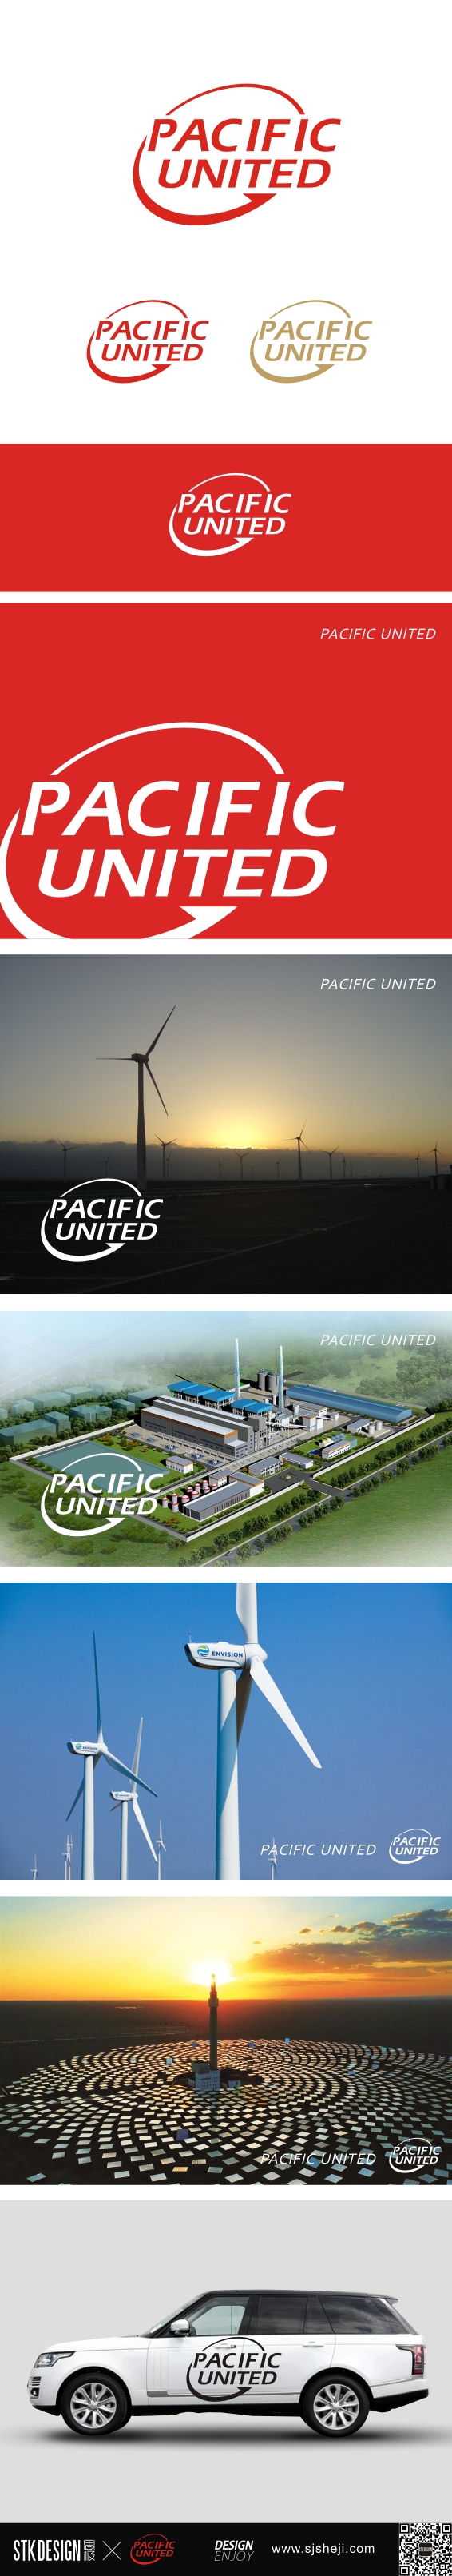 PACIFICUNITED标志设计